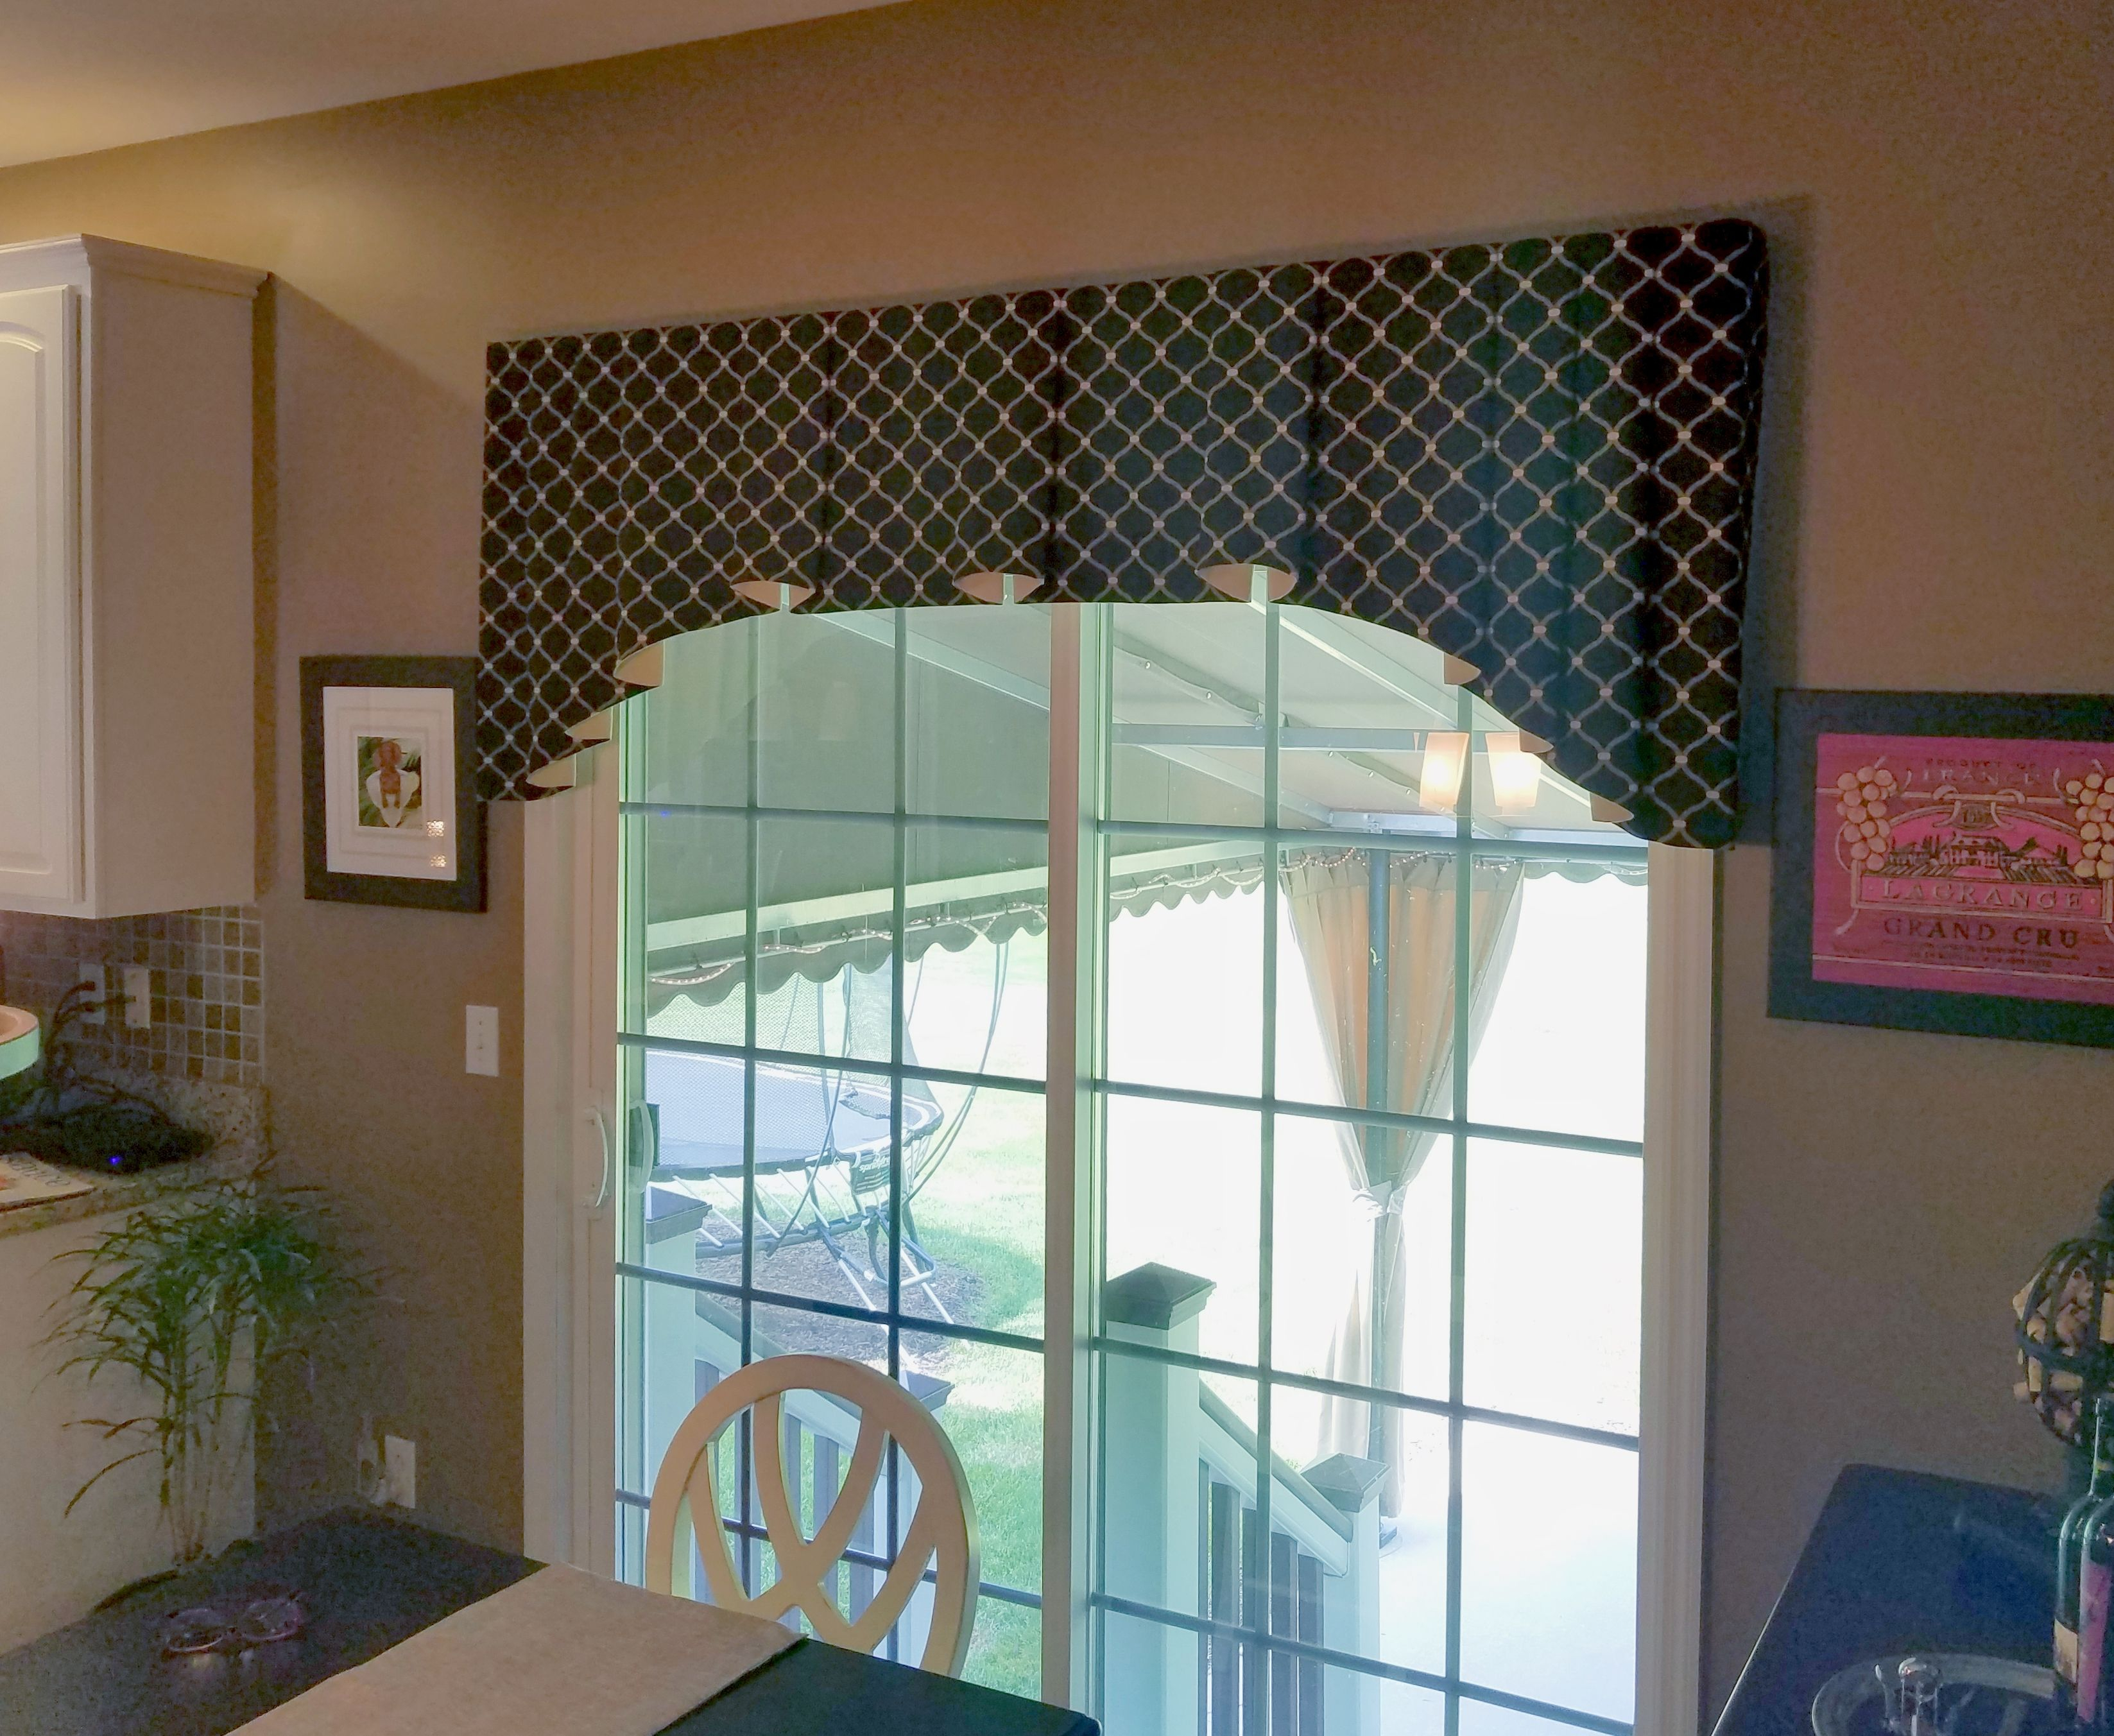 Valance Over Sliding Glass Doors In Past Few Years There in dimensions 3294 X 2705